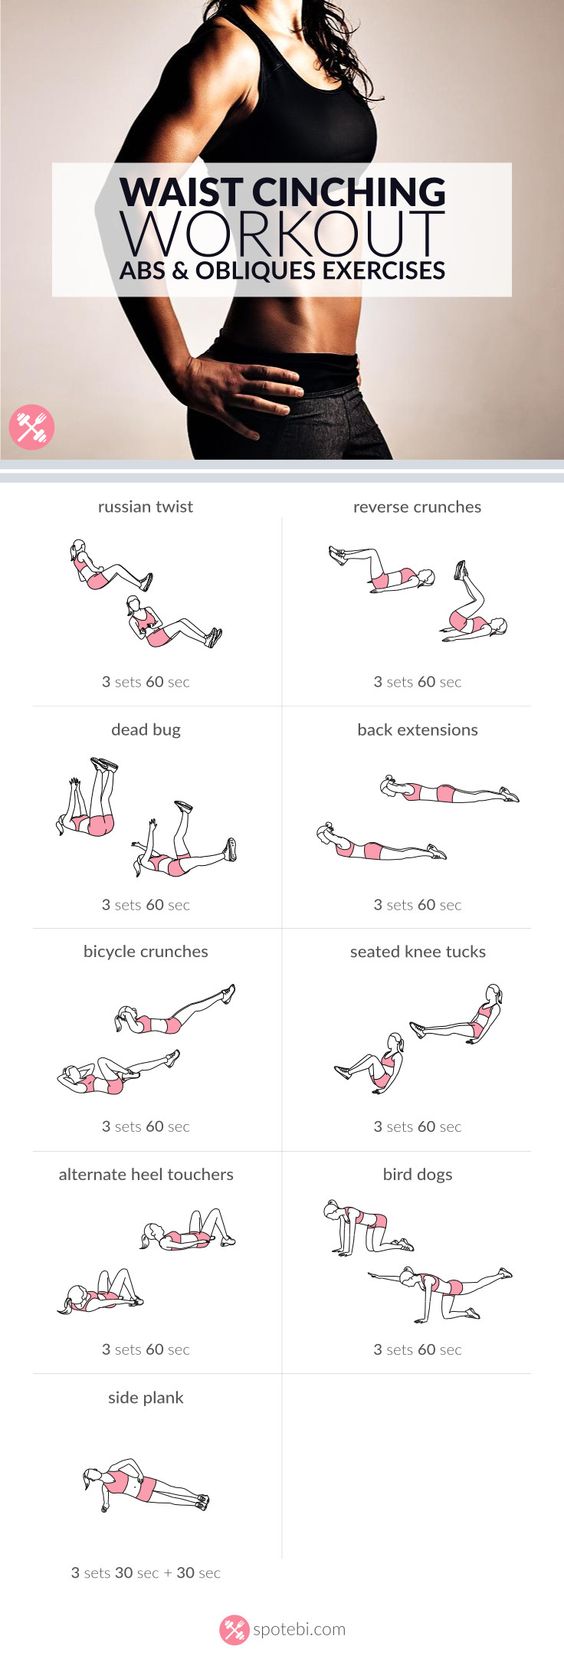 Ab Workout At Home TheOPLife.com